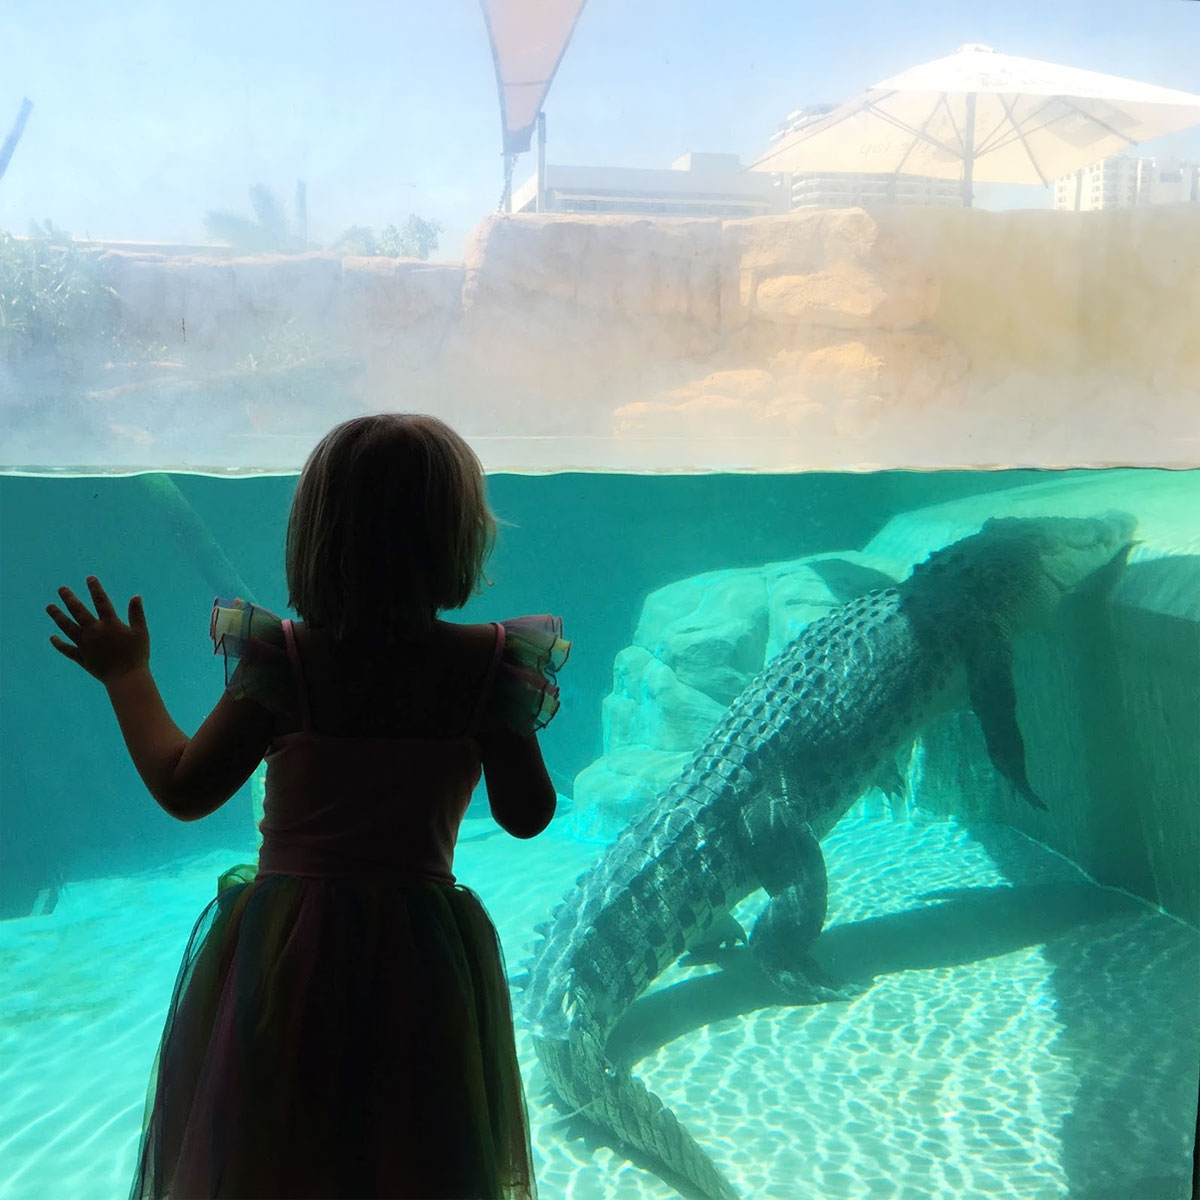 A young girl and a 4m Crocodile